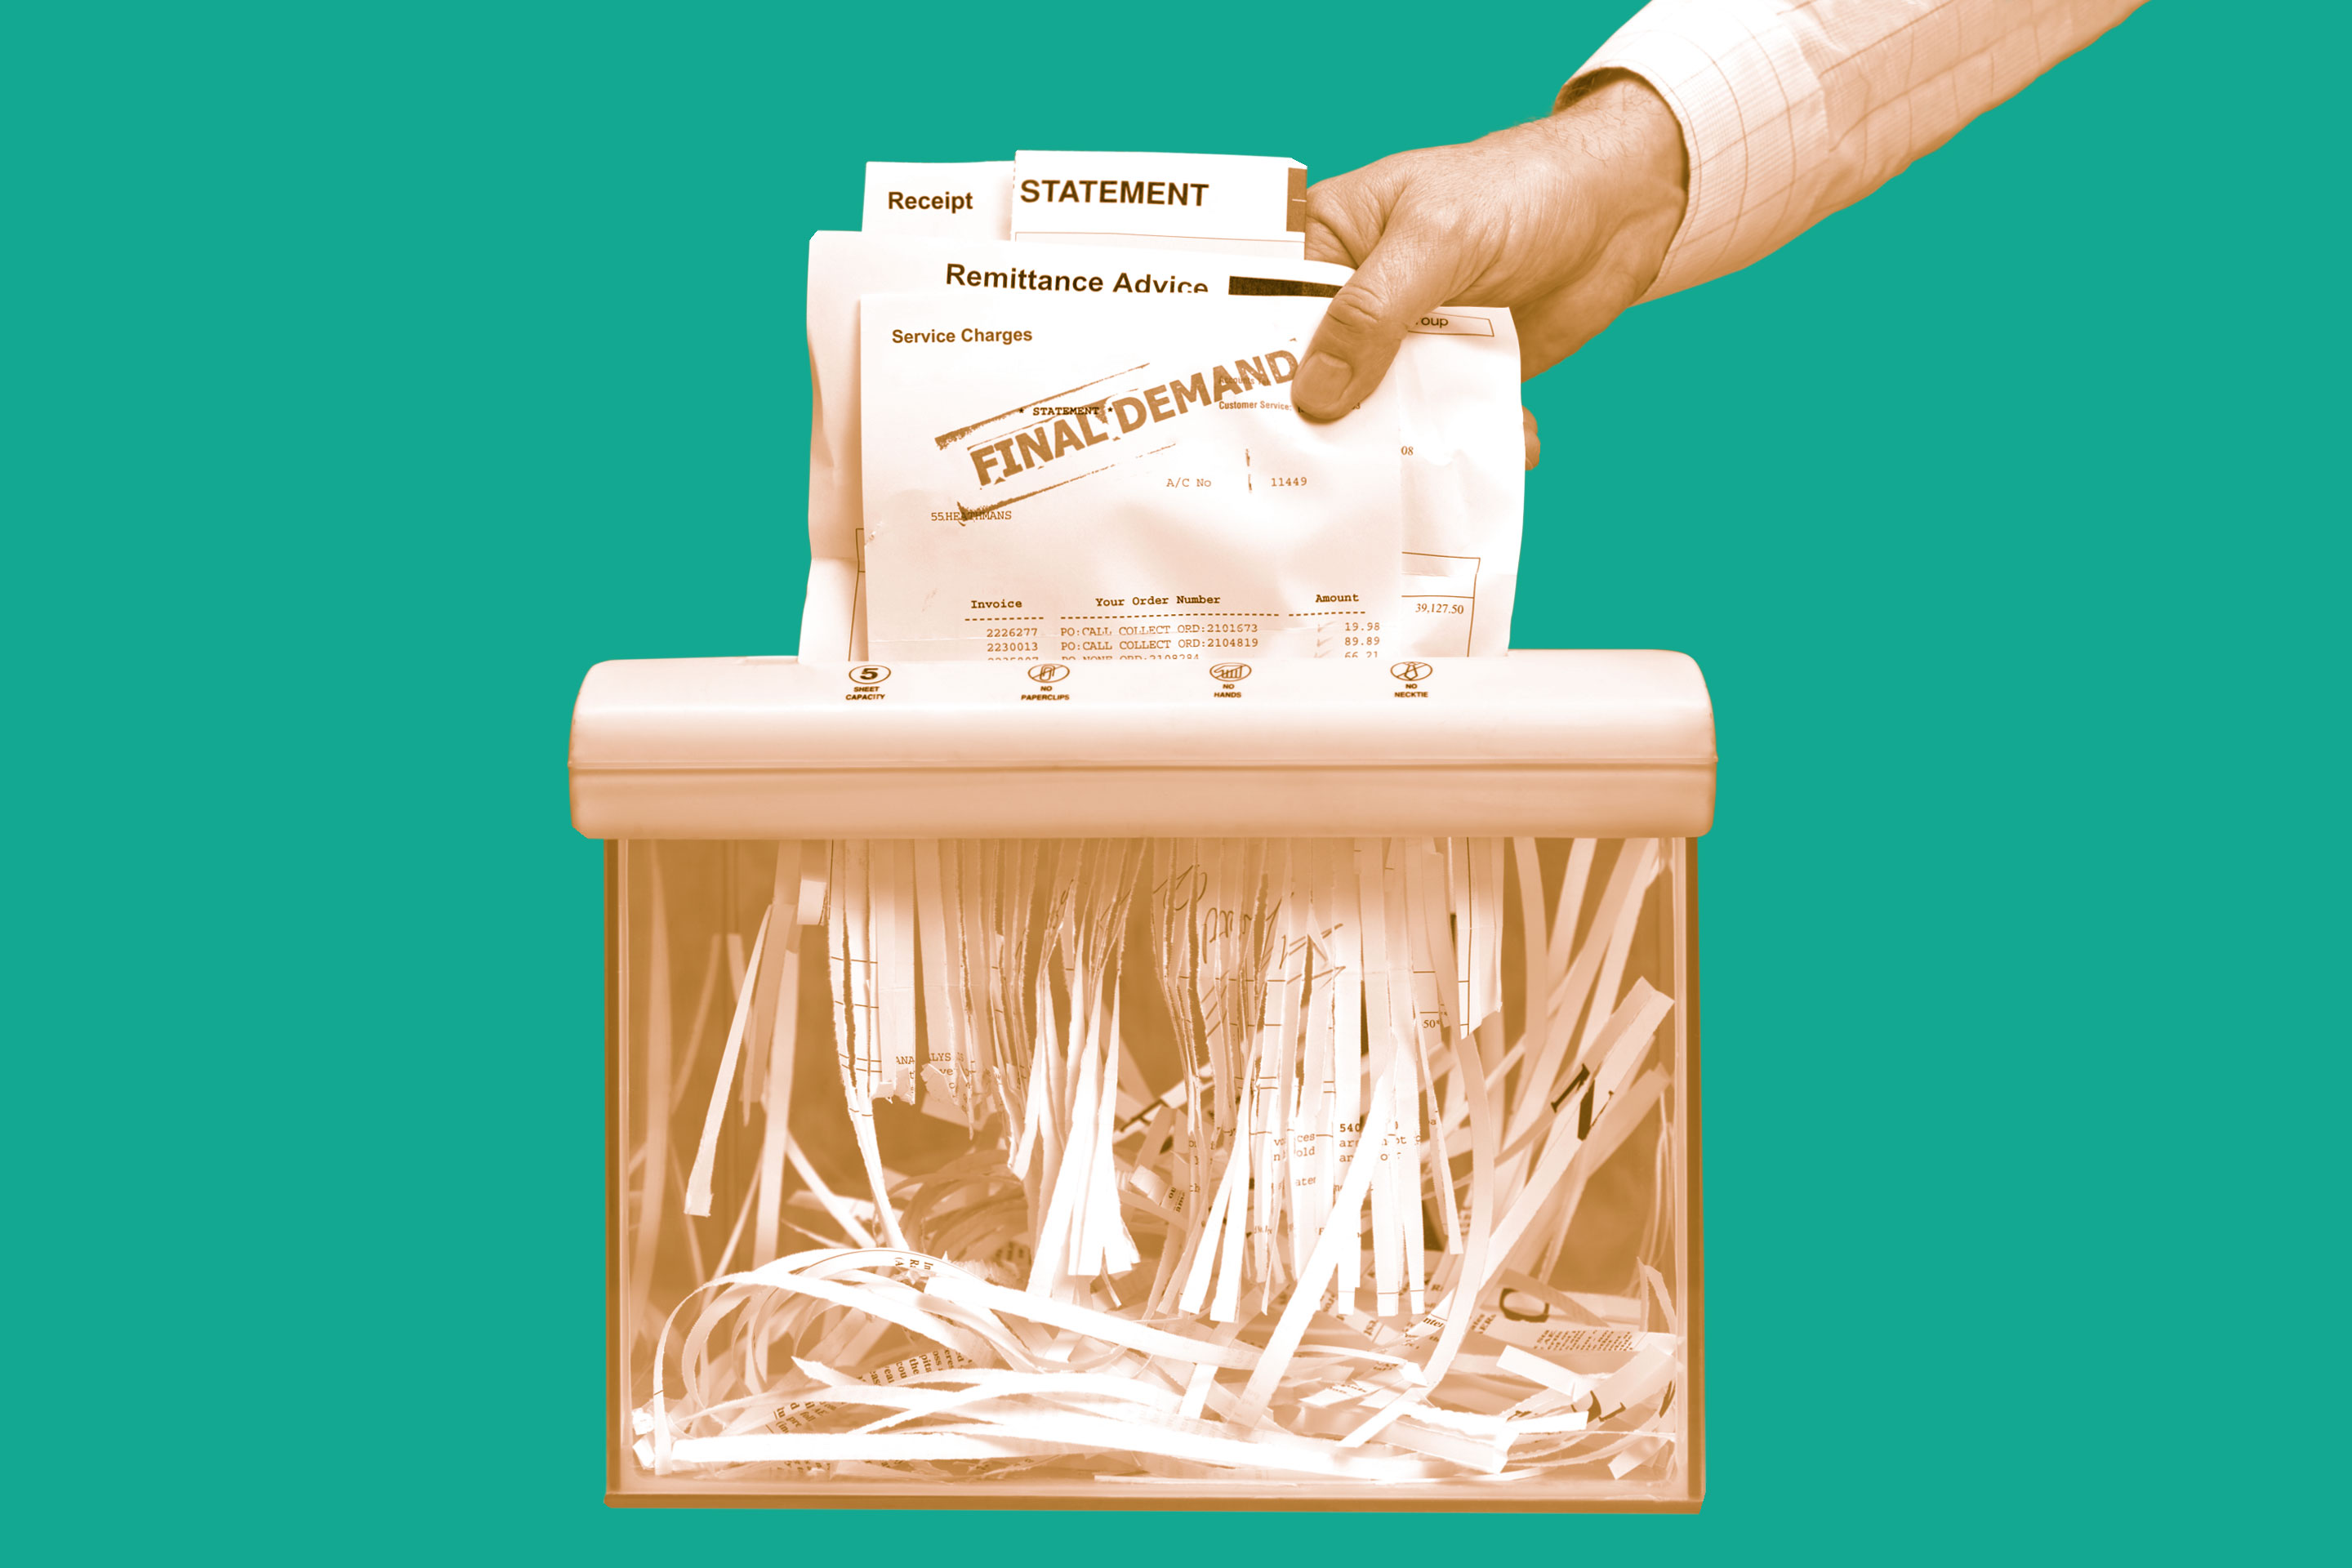 If You're Not Shredding All Your Mail, You're Making a Big Mistake